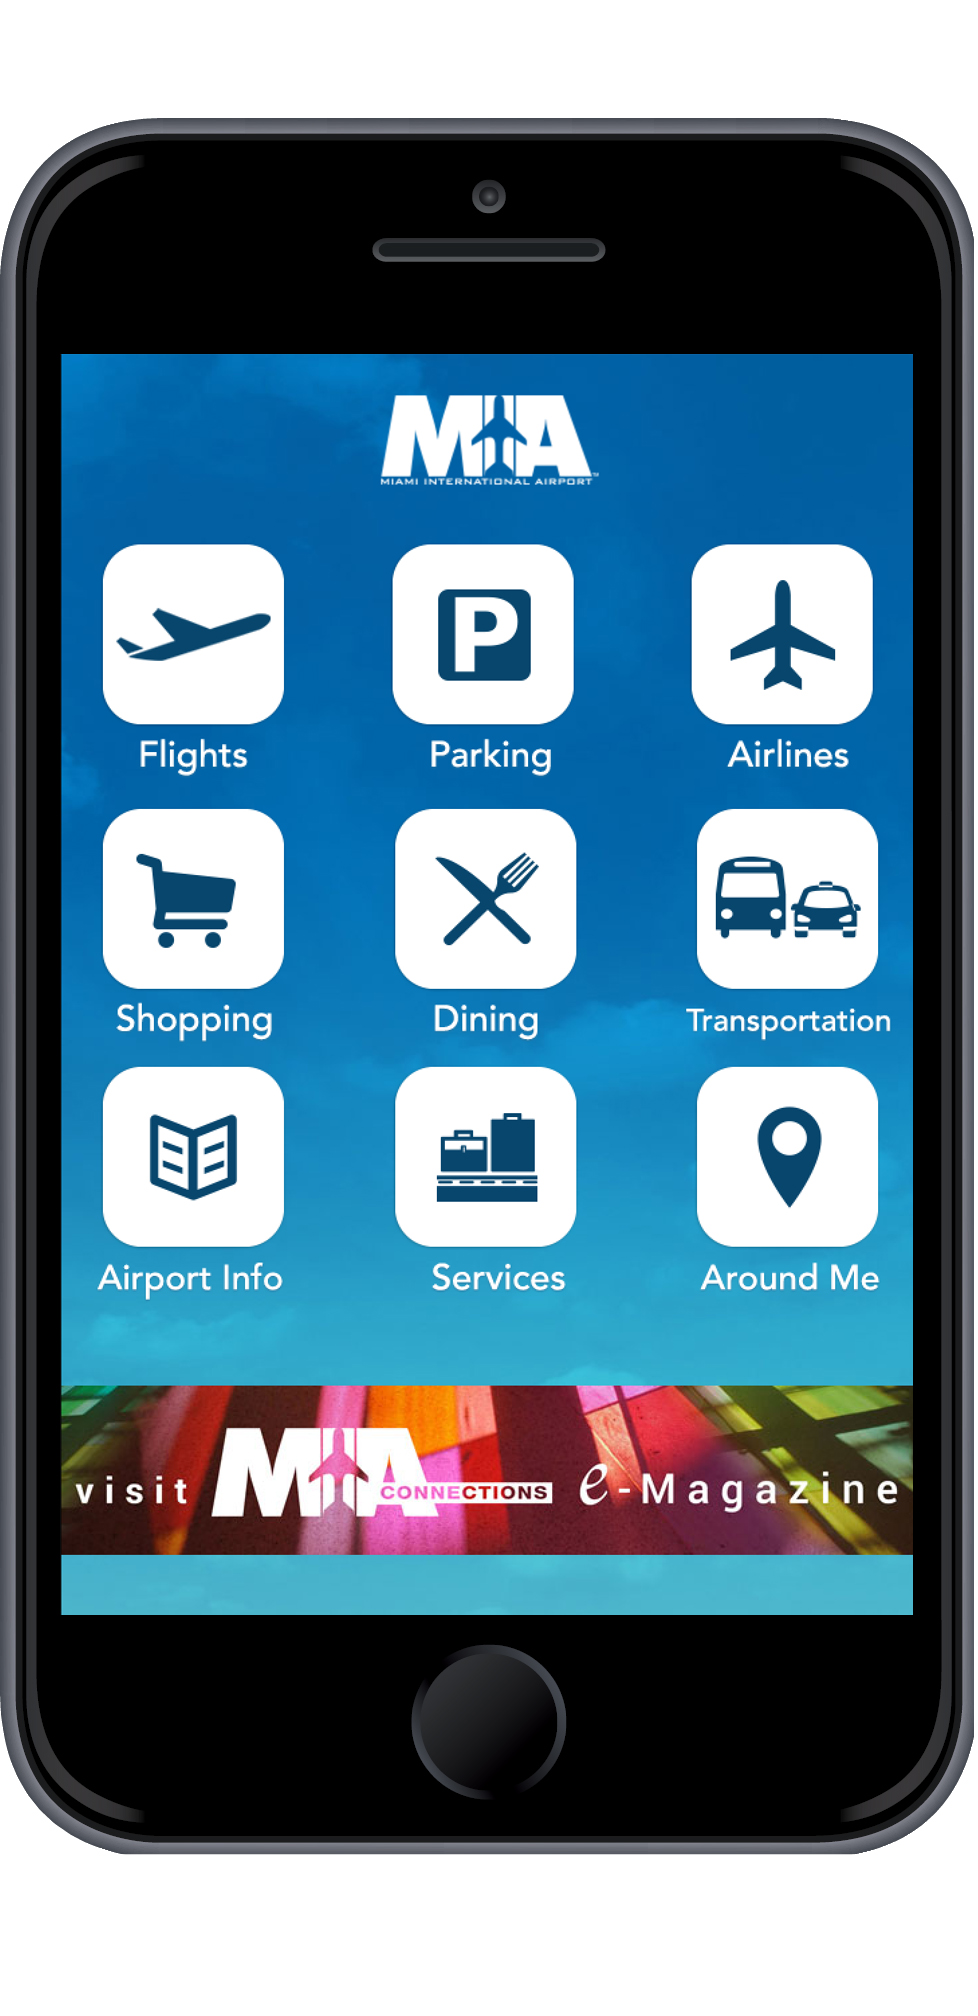 New Miami International Airport Mobile App - MIA Airport Official